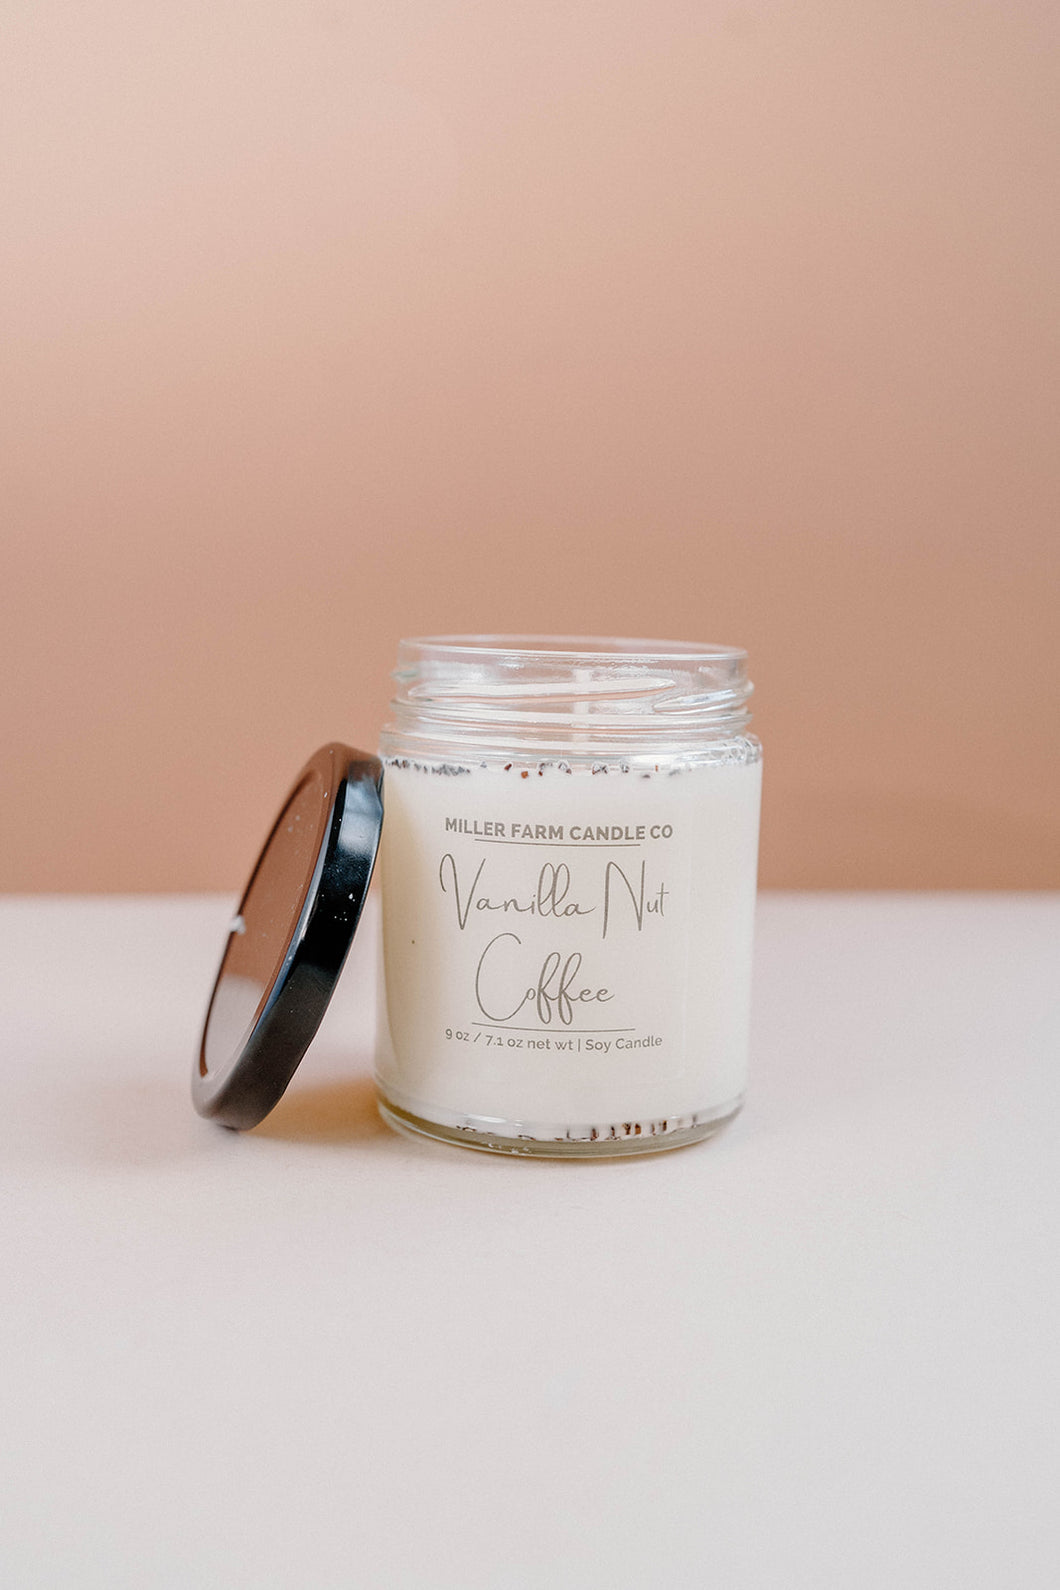 Vanilla Nut Coffee Soy Candle